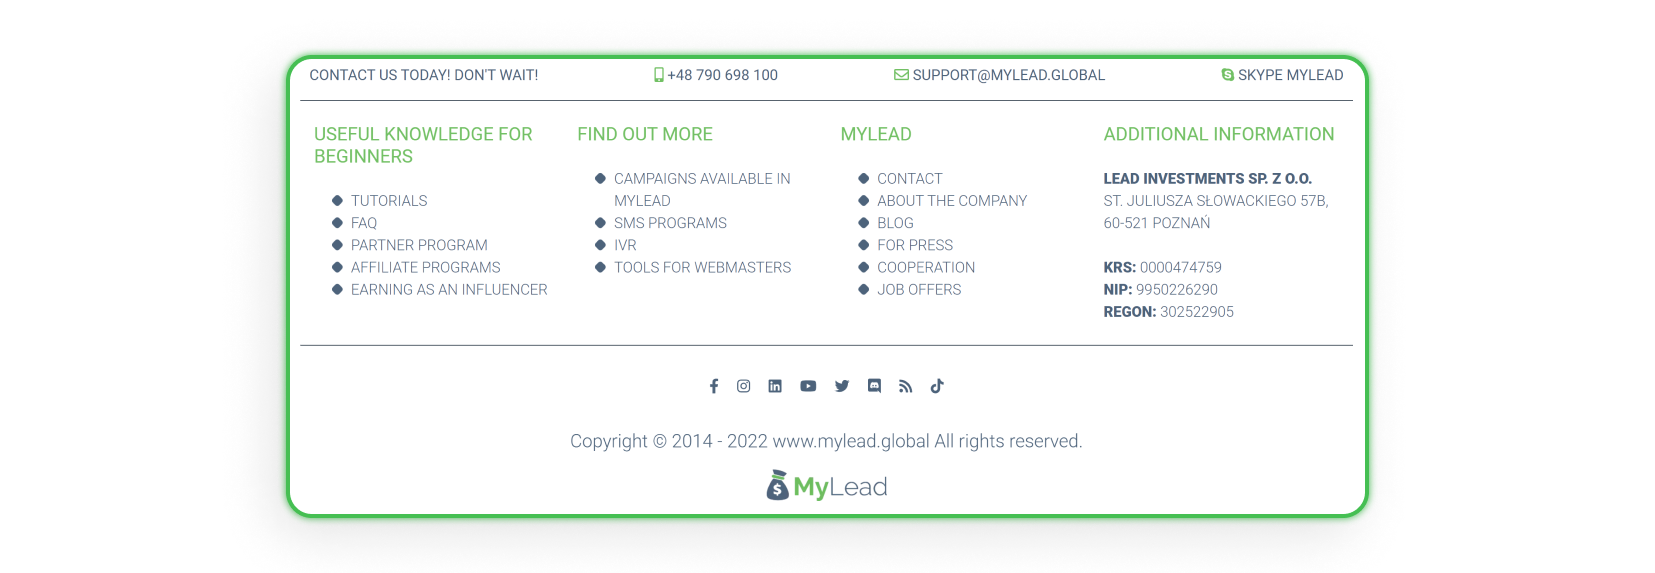 MyLead's footer